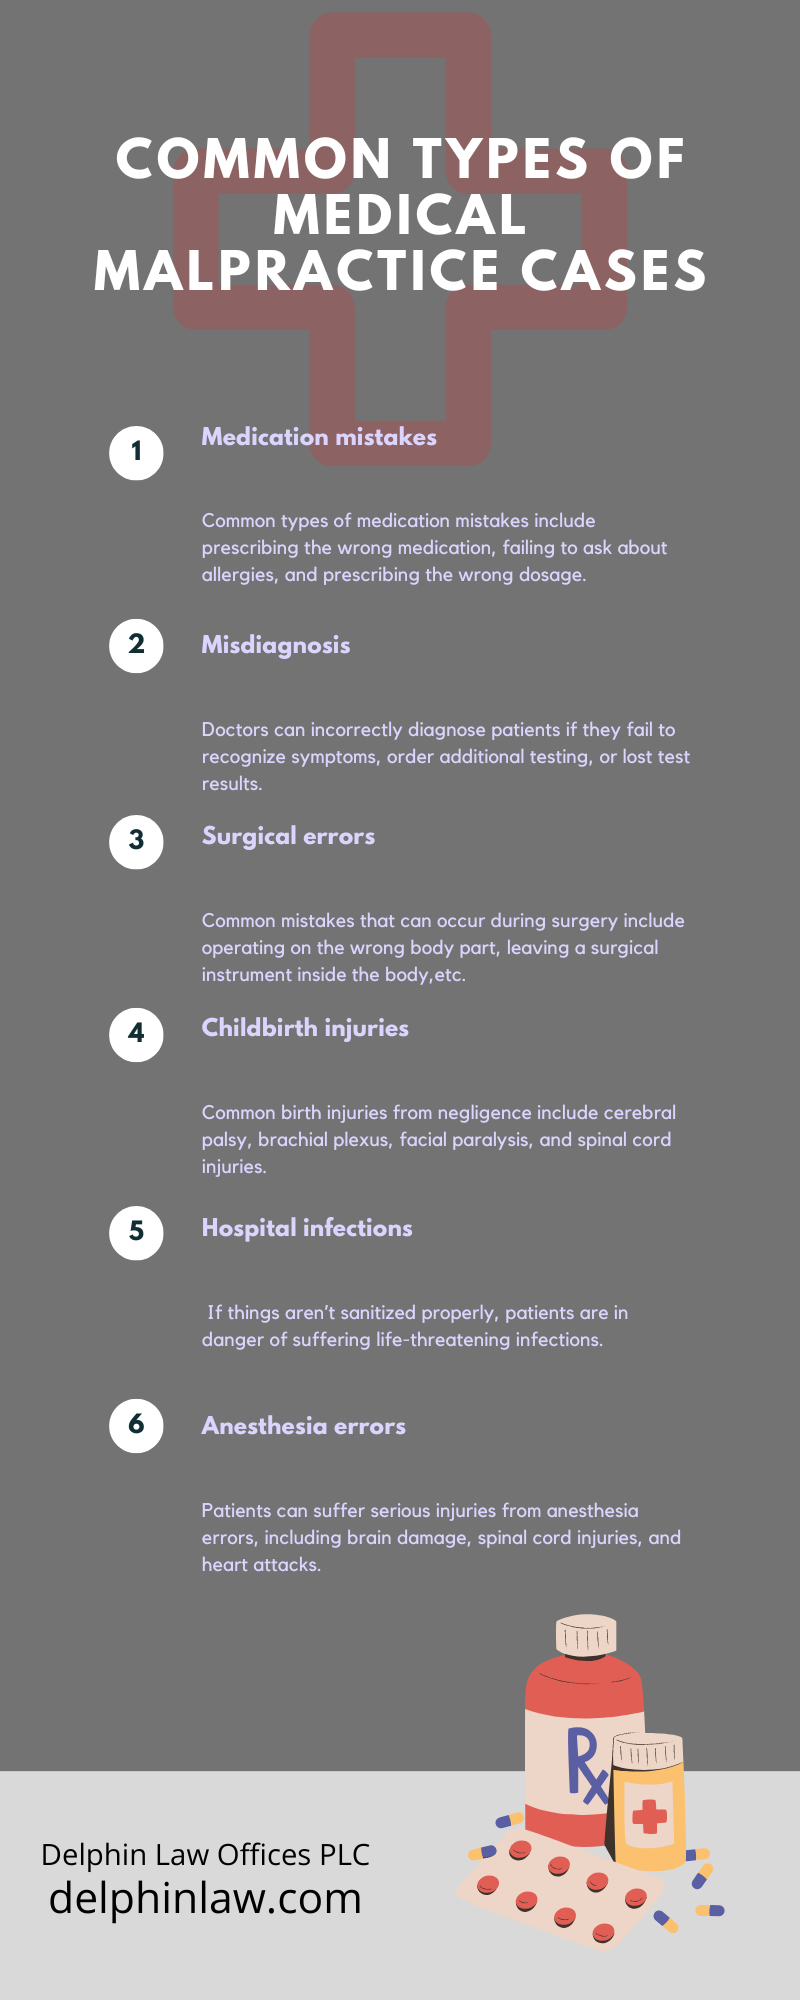 COMMON TYPES OF MEDICAL MALPRACTICE CASES Infographic